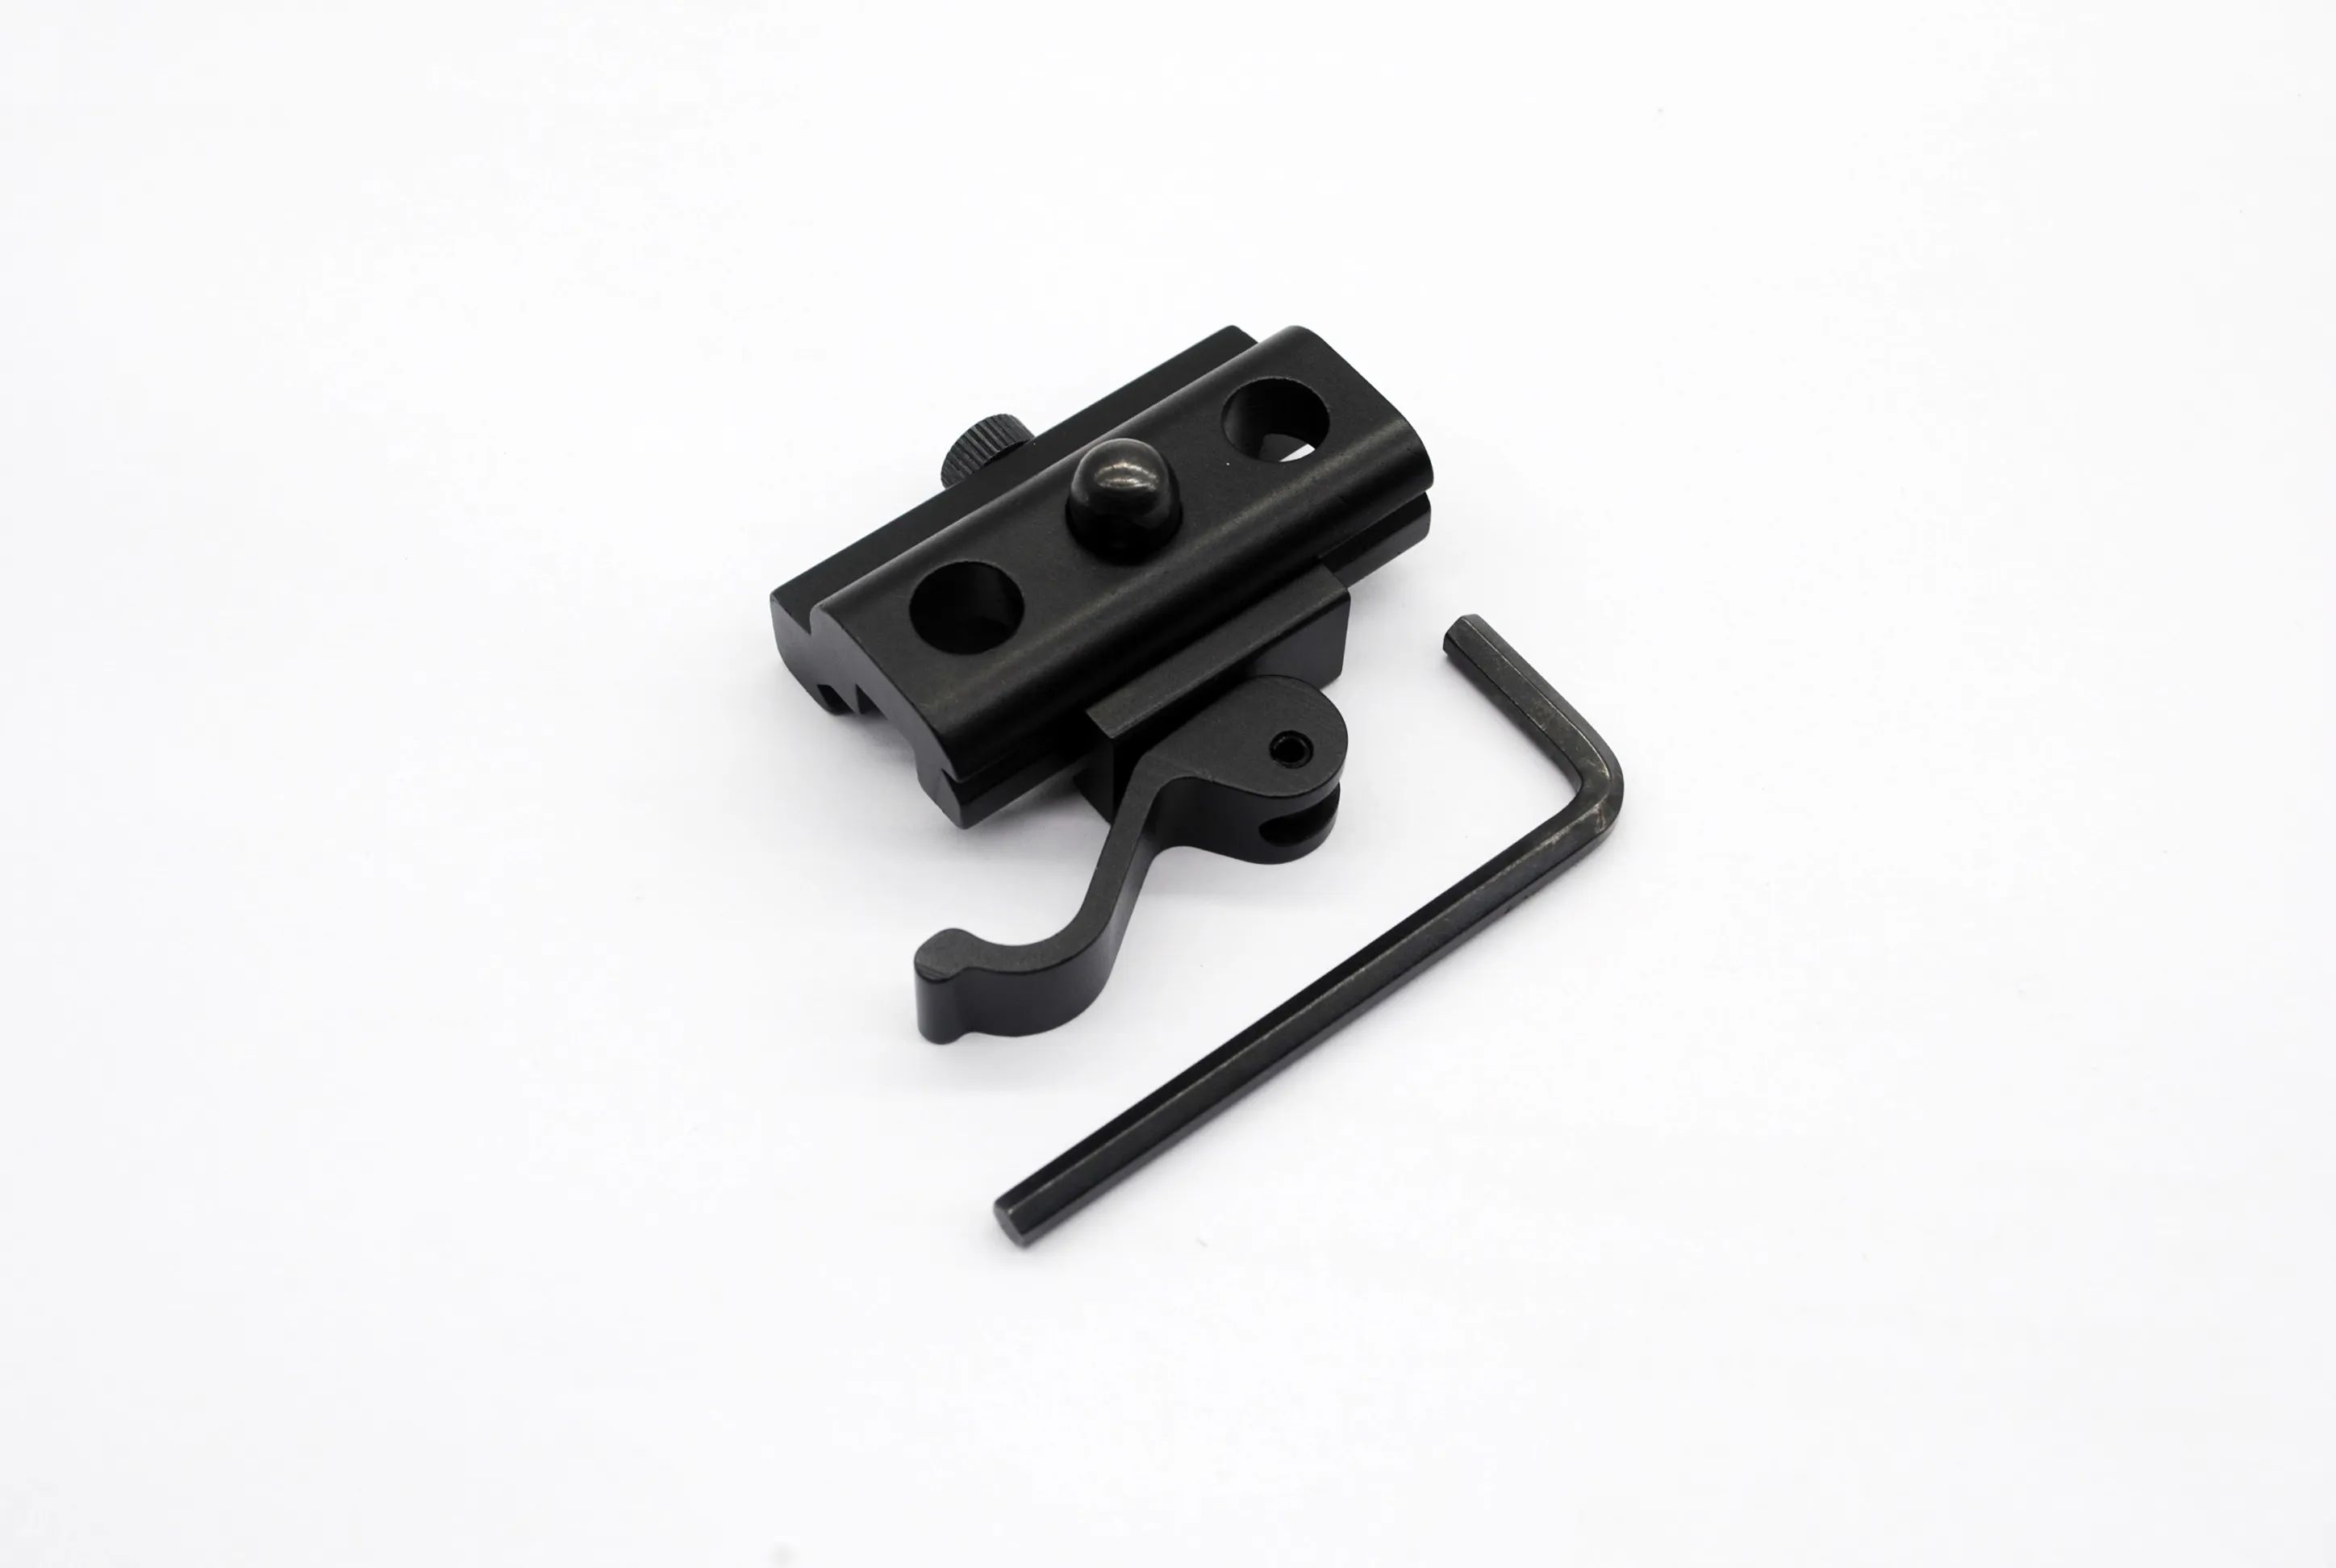 Quick Detach Release Bipod Sling Swivel Adapter QD Quick Detachable for 20mm Picatinny Weaver Rail Hunting Accessories